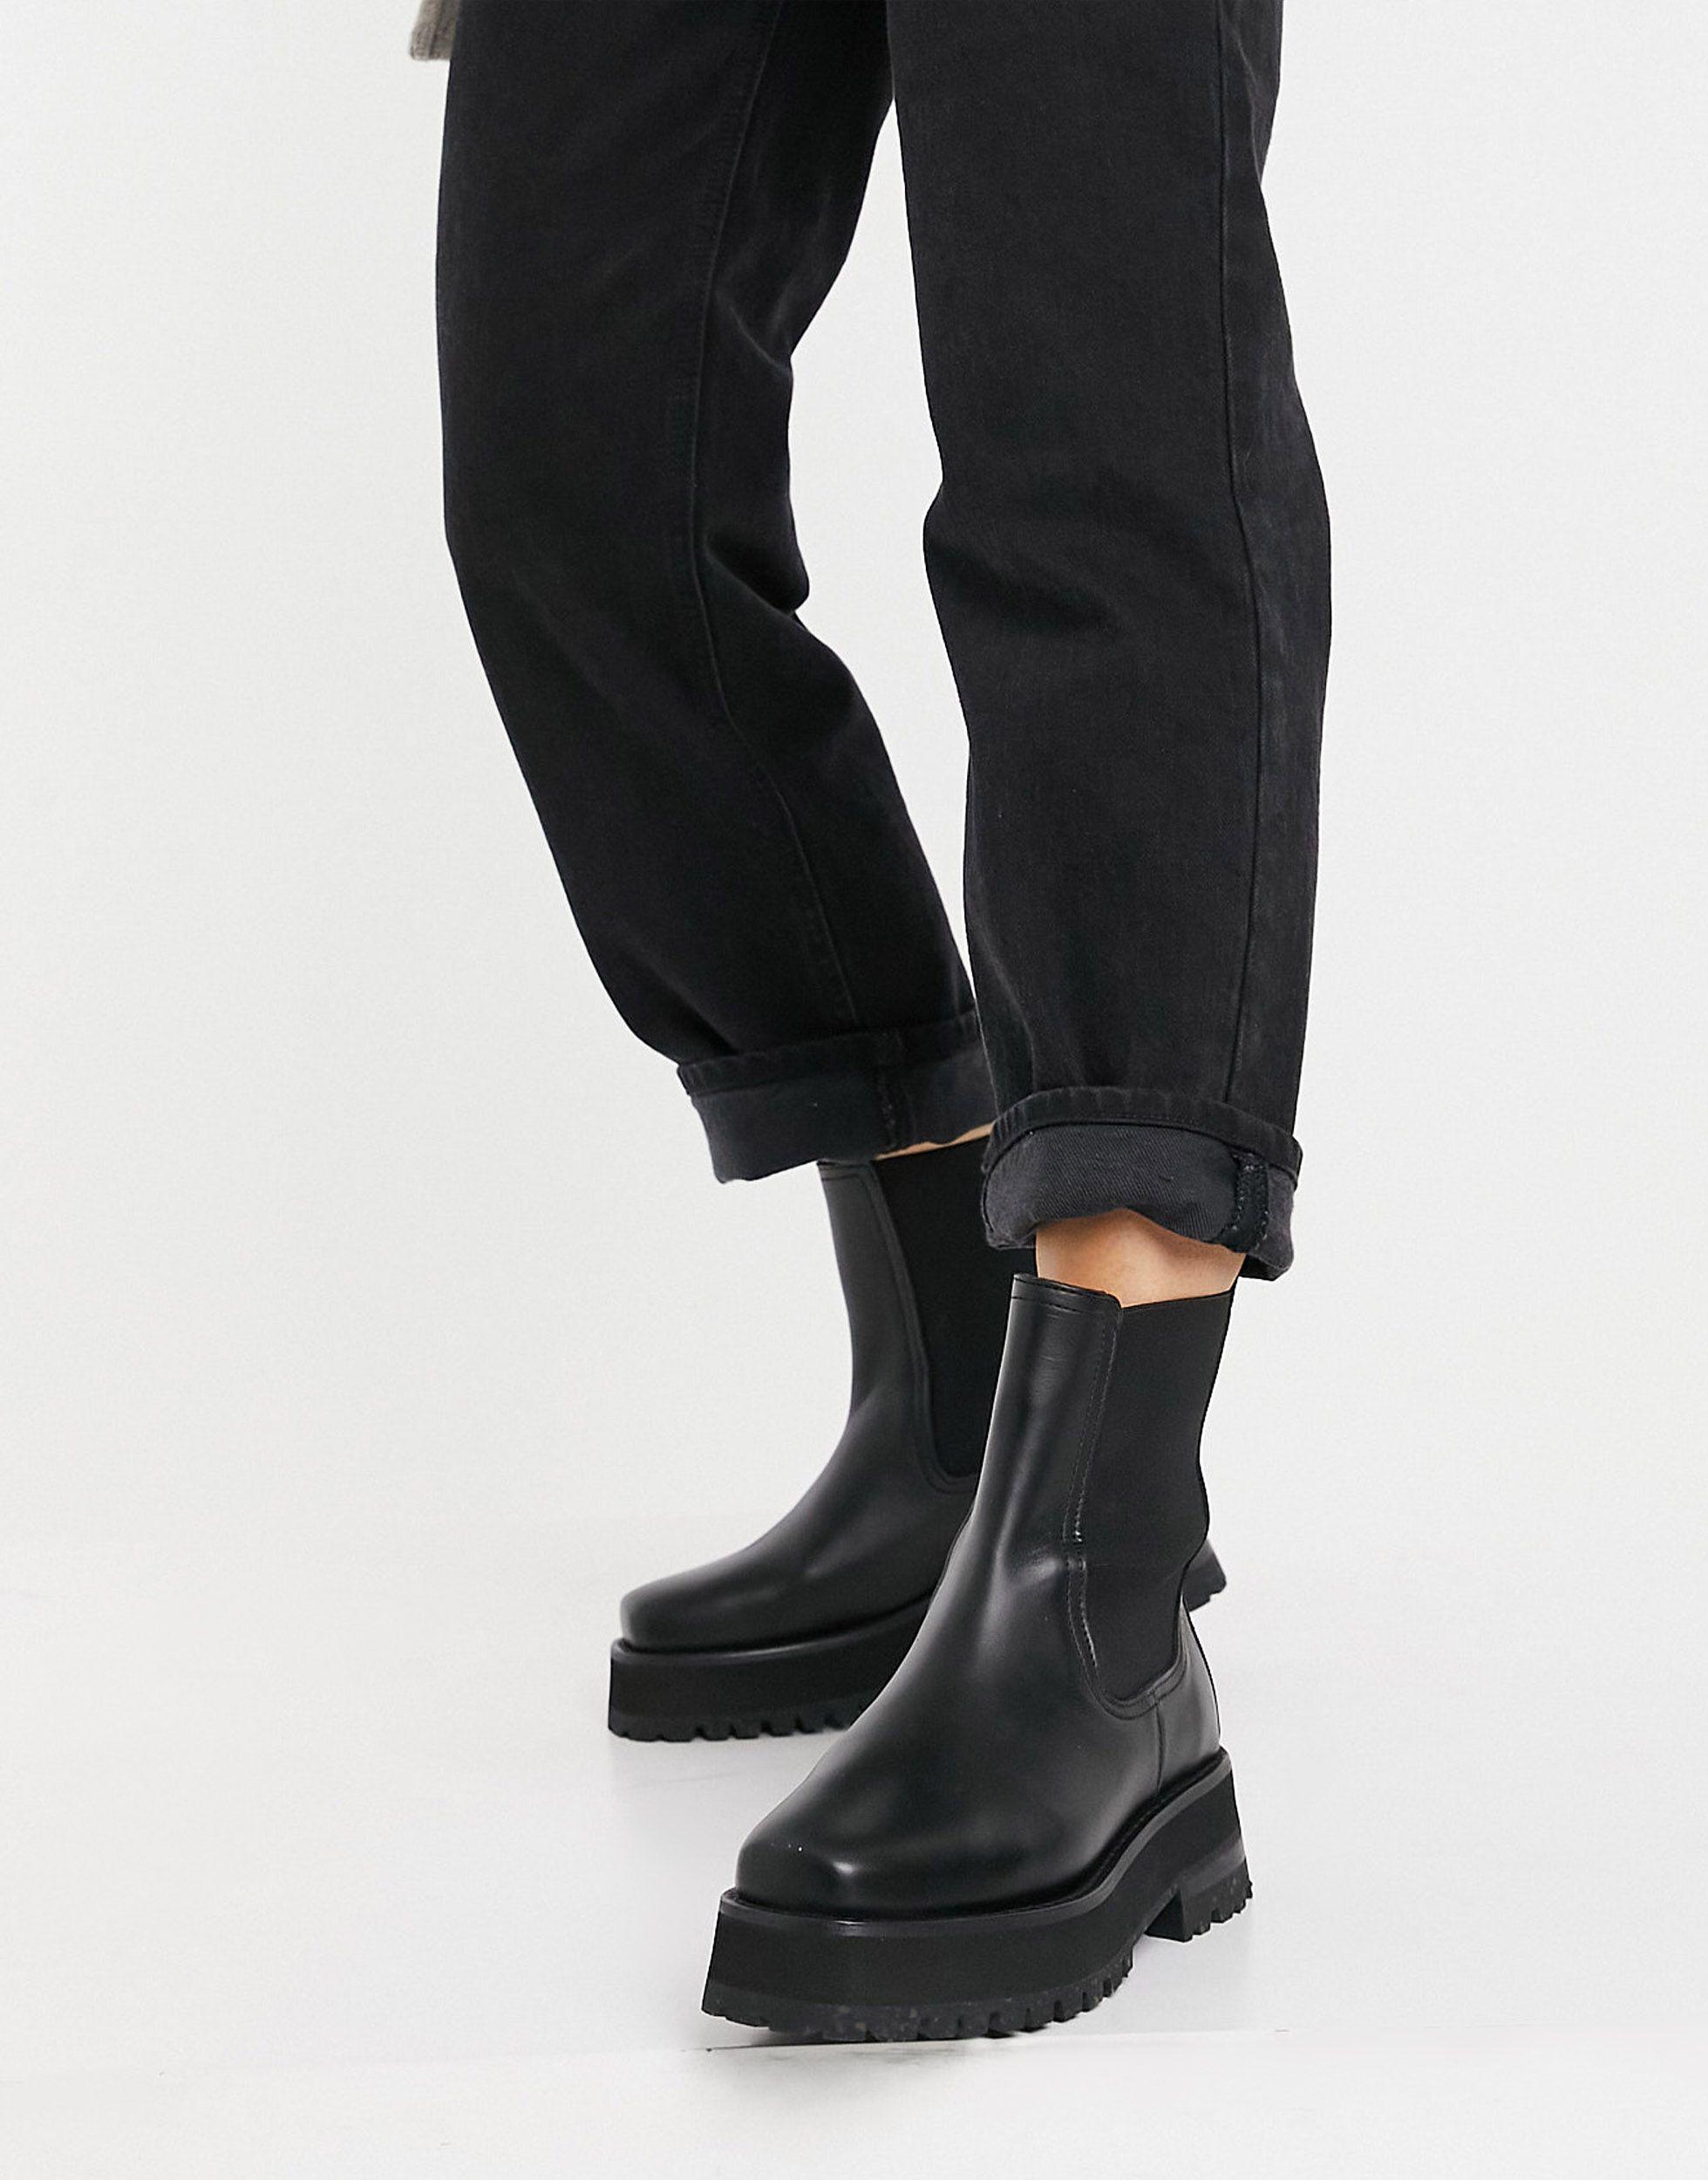 & Other Stories Leather Chunky Square Toe Boots in Black | Lyst